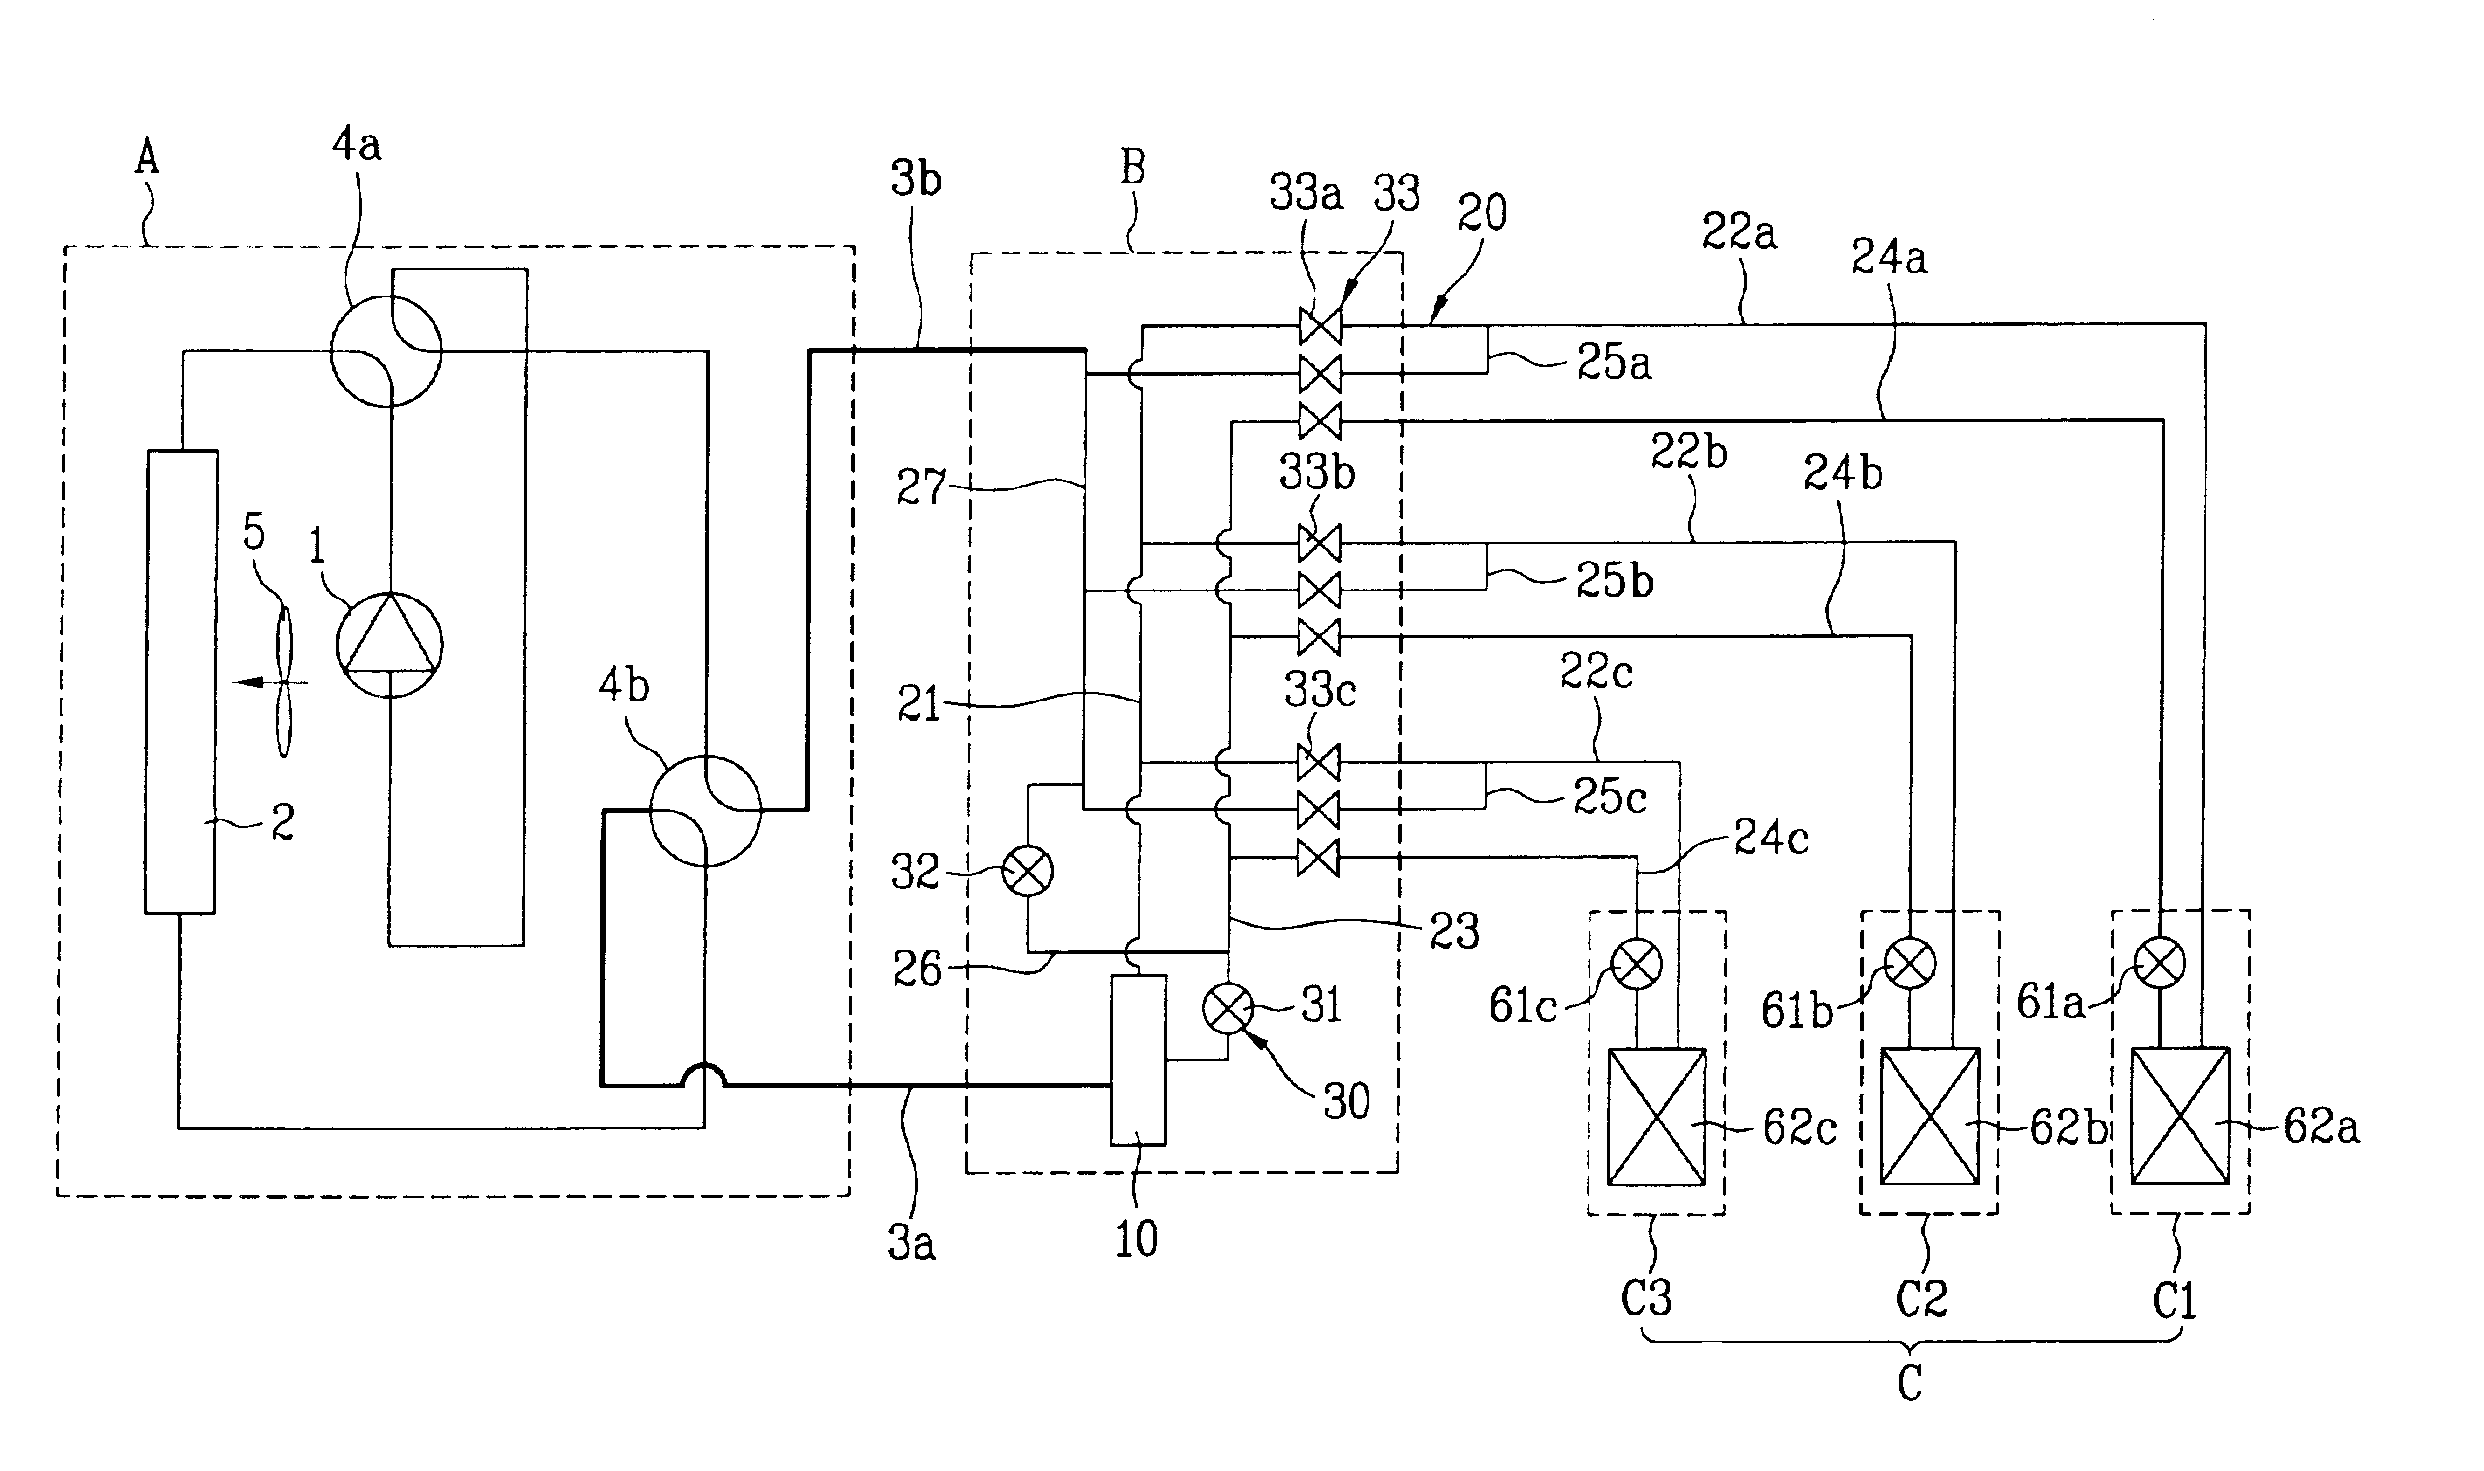 Multi-type air conditioner and method for operating the same